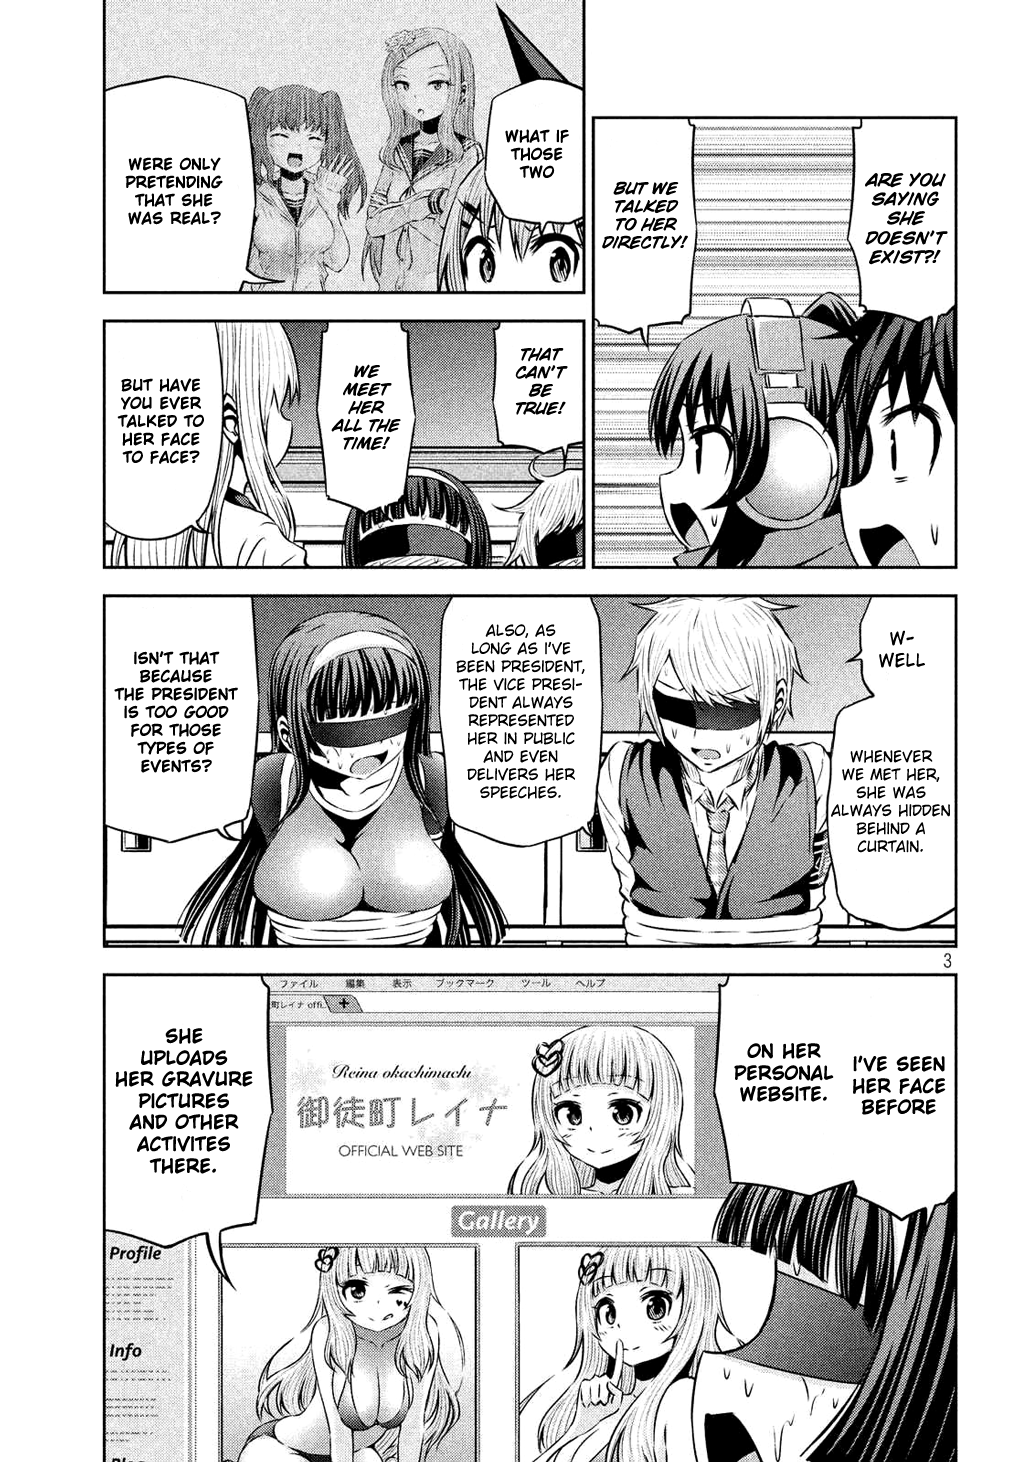 Chikotan, Kowareru Vol.6 Chapter 58: What Is The Secret Of The Student Council President?! Chikotan's Great Counterattack Begins!! - Picture 3